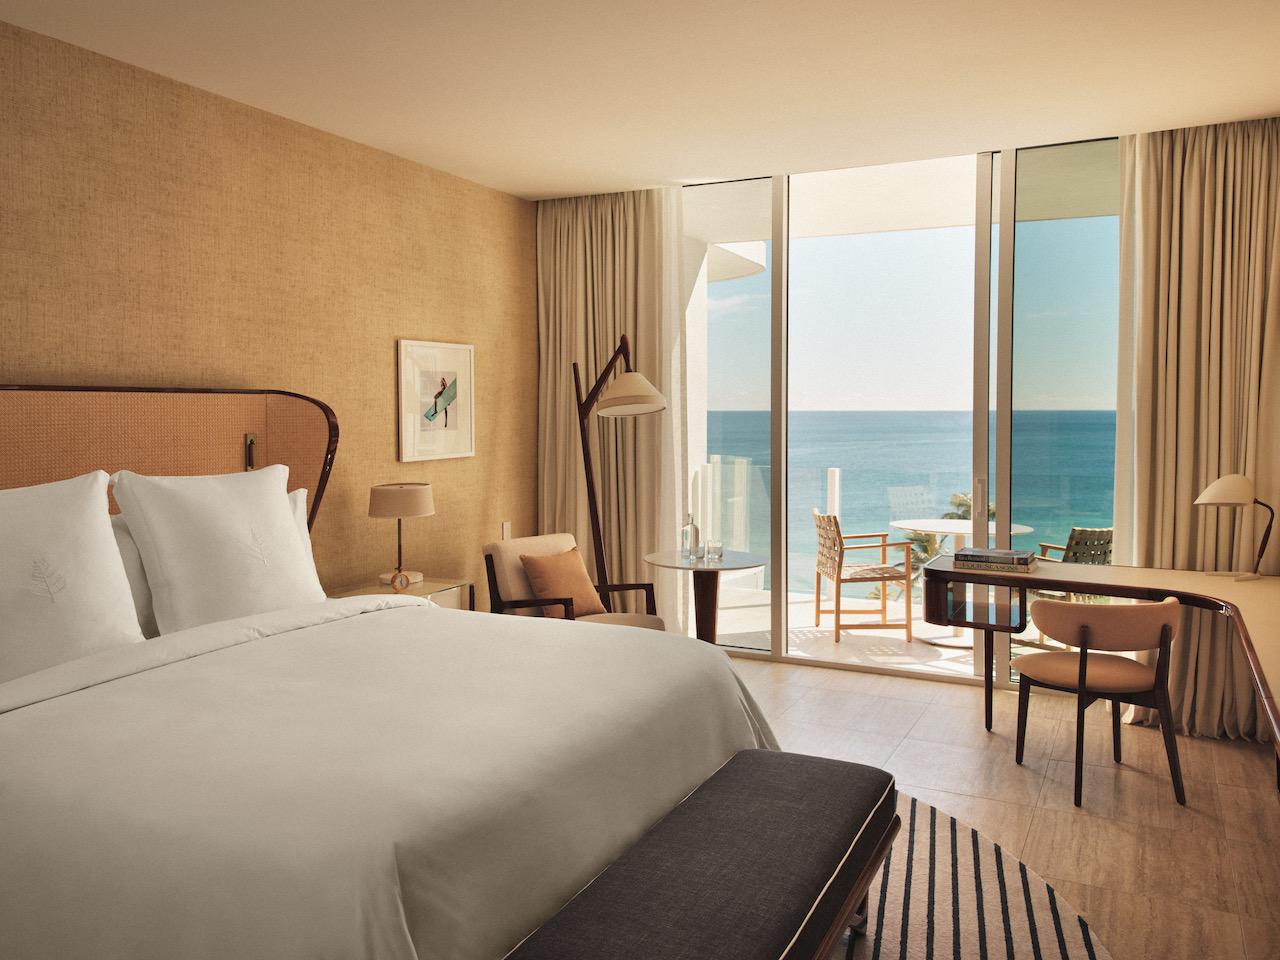 The Newest Four Seasons Hotel Hails Fort Lauderdale’s Yachting Heritage